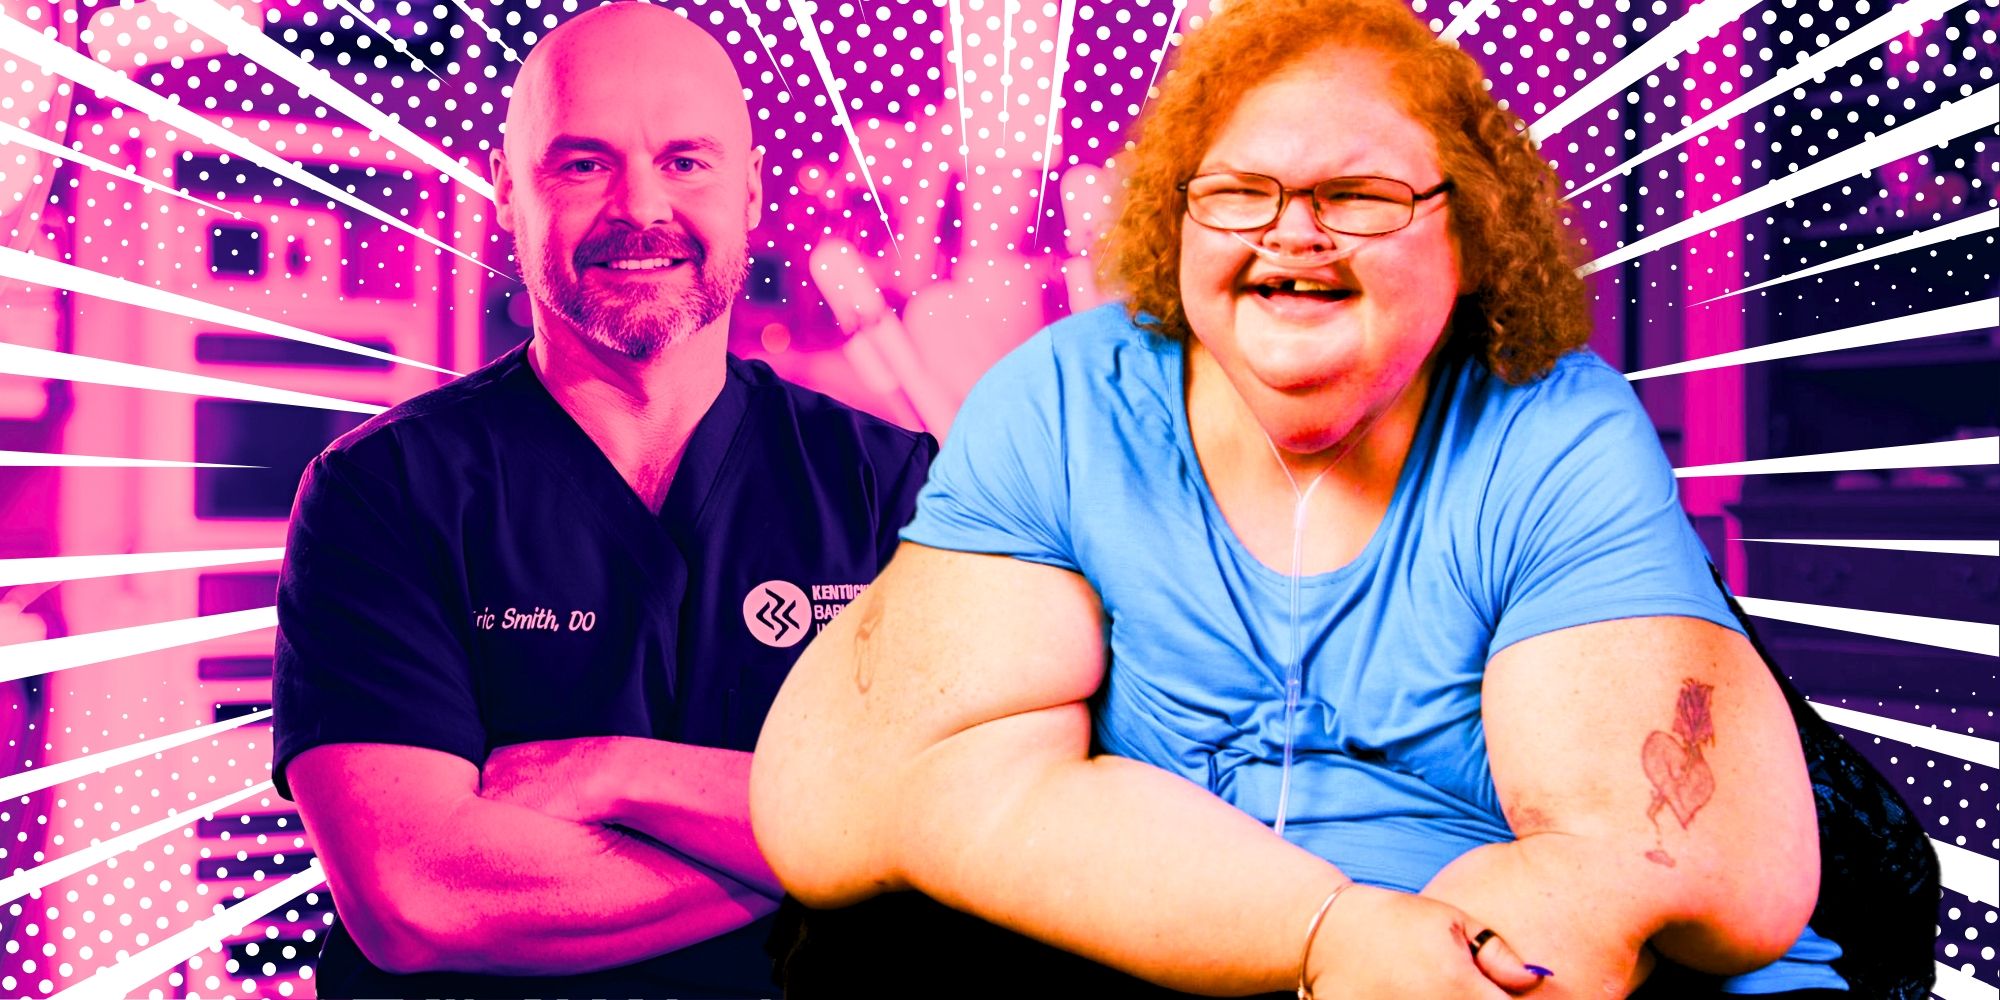  1000-Lb Sisters Tammy and  Surgeon Dr. Eric Smith